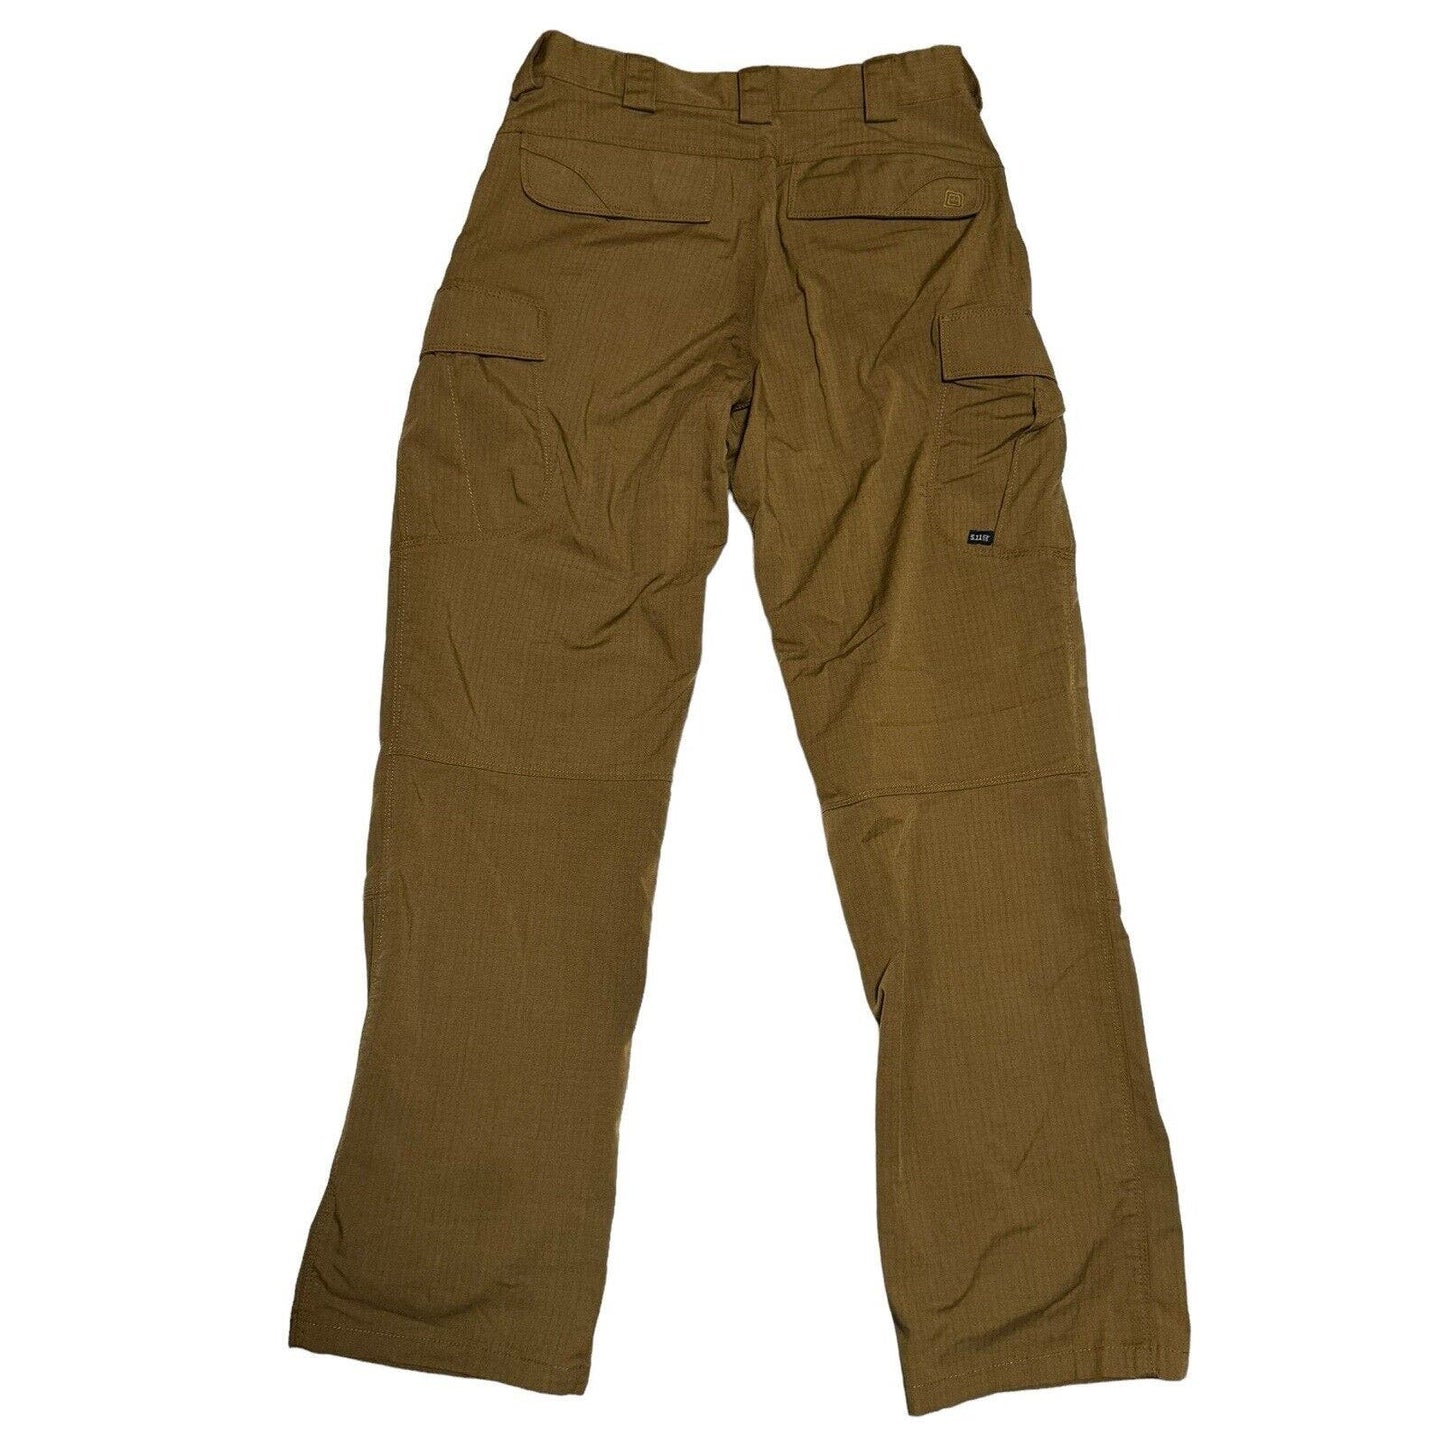 5.11 Tactical Stryke Mens Cargo Pants Brown Size 30x32